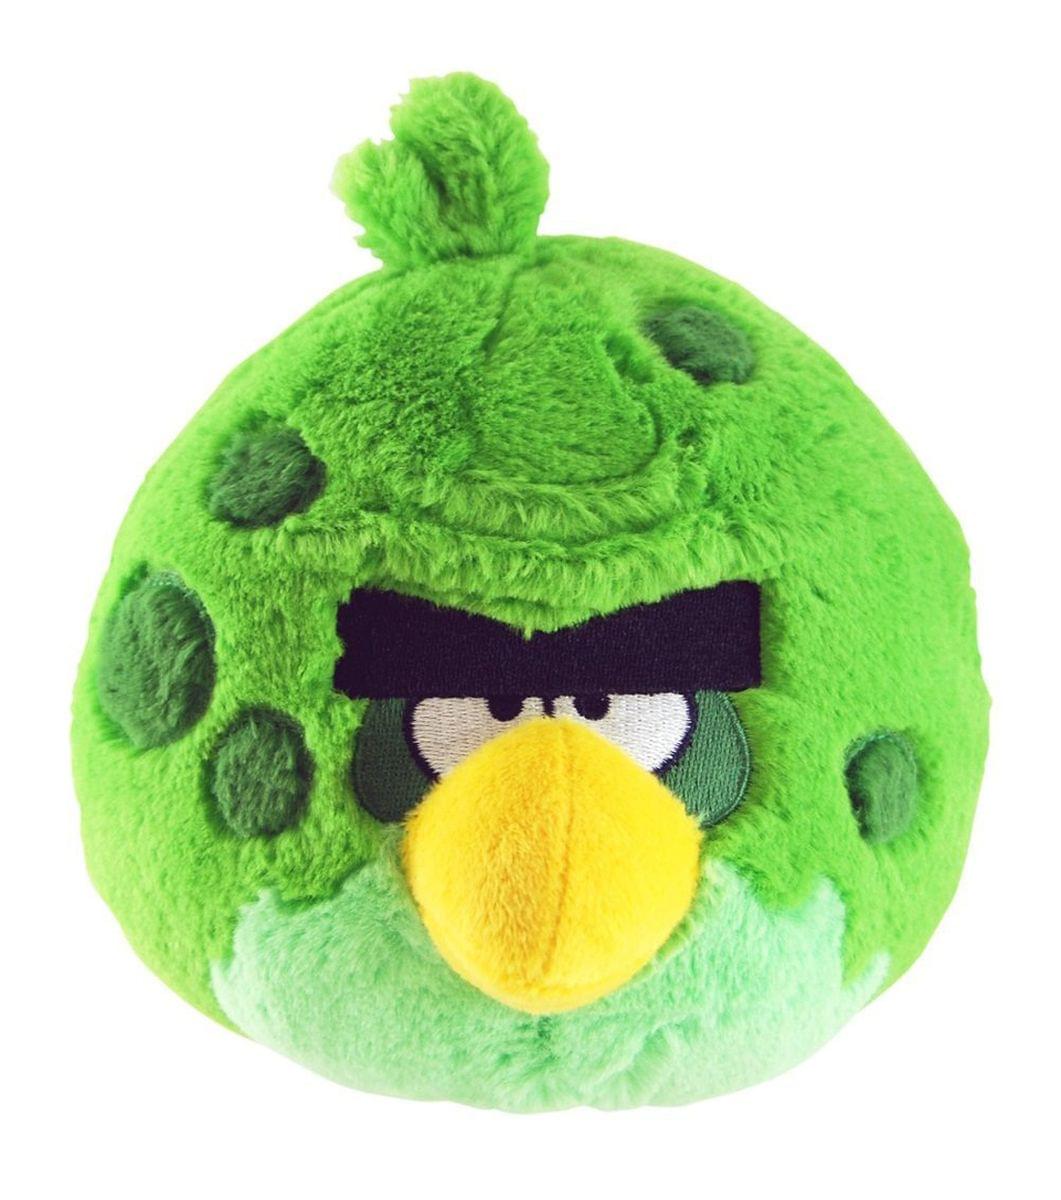 Angry Birds 8" Green Space Bird Plush Officially Licensed